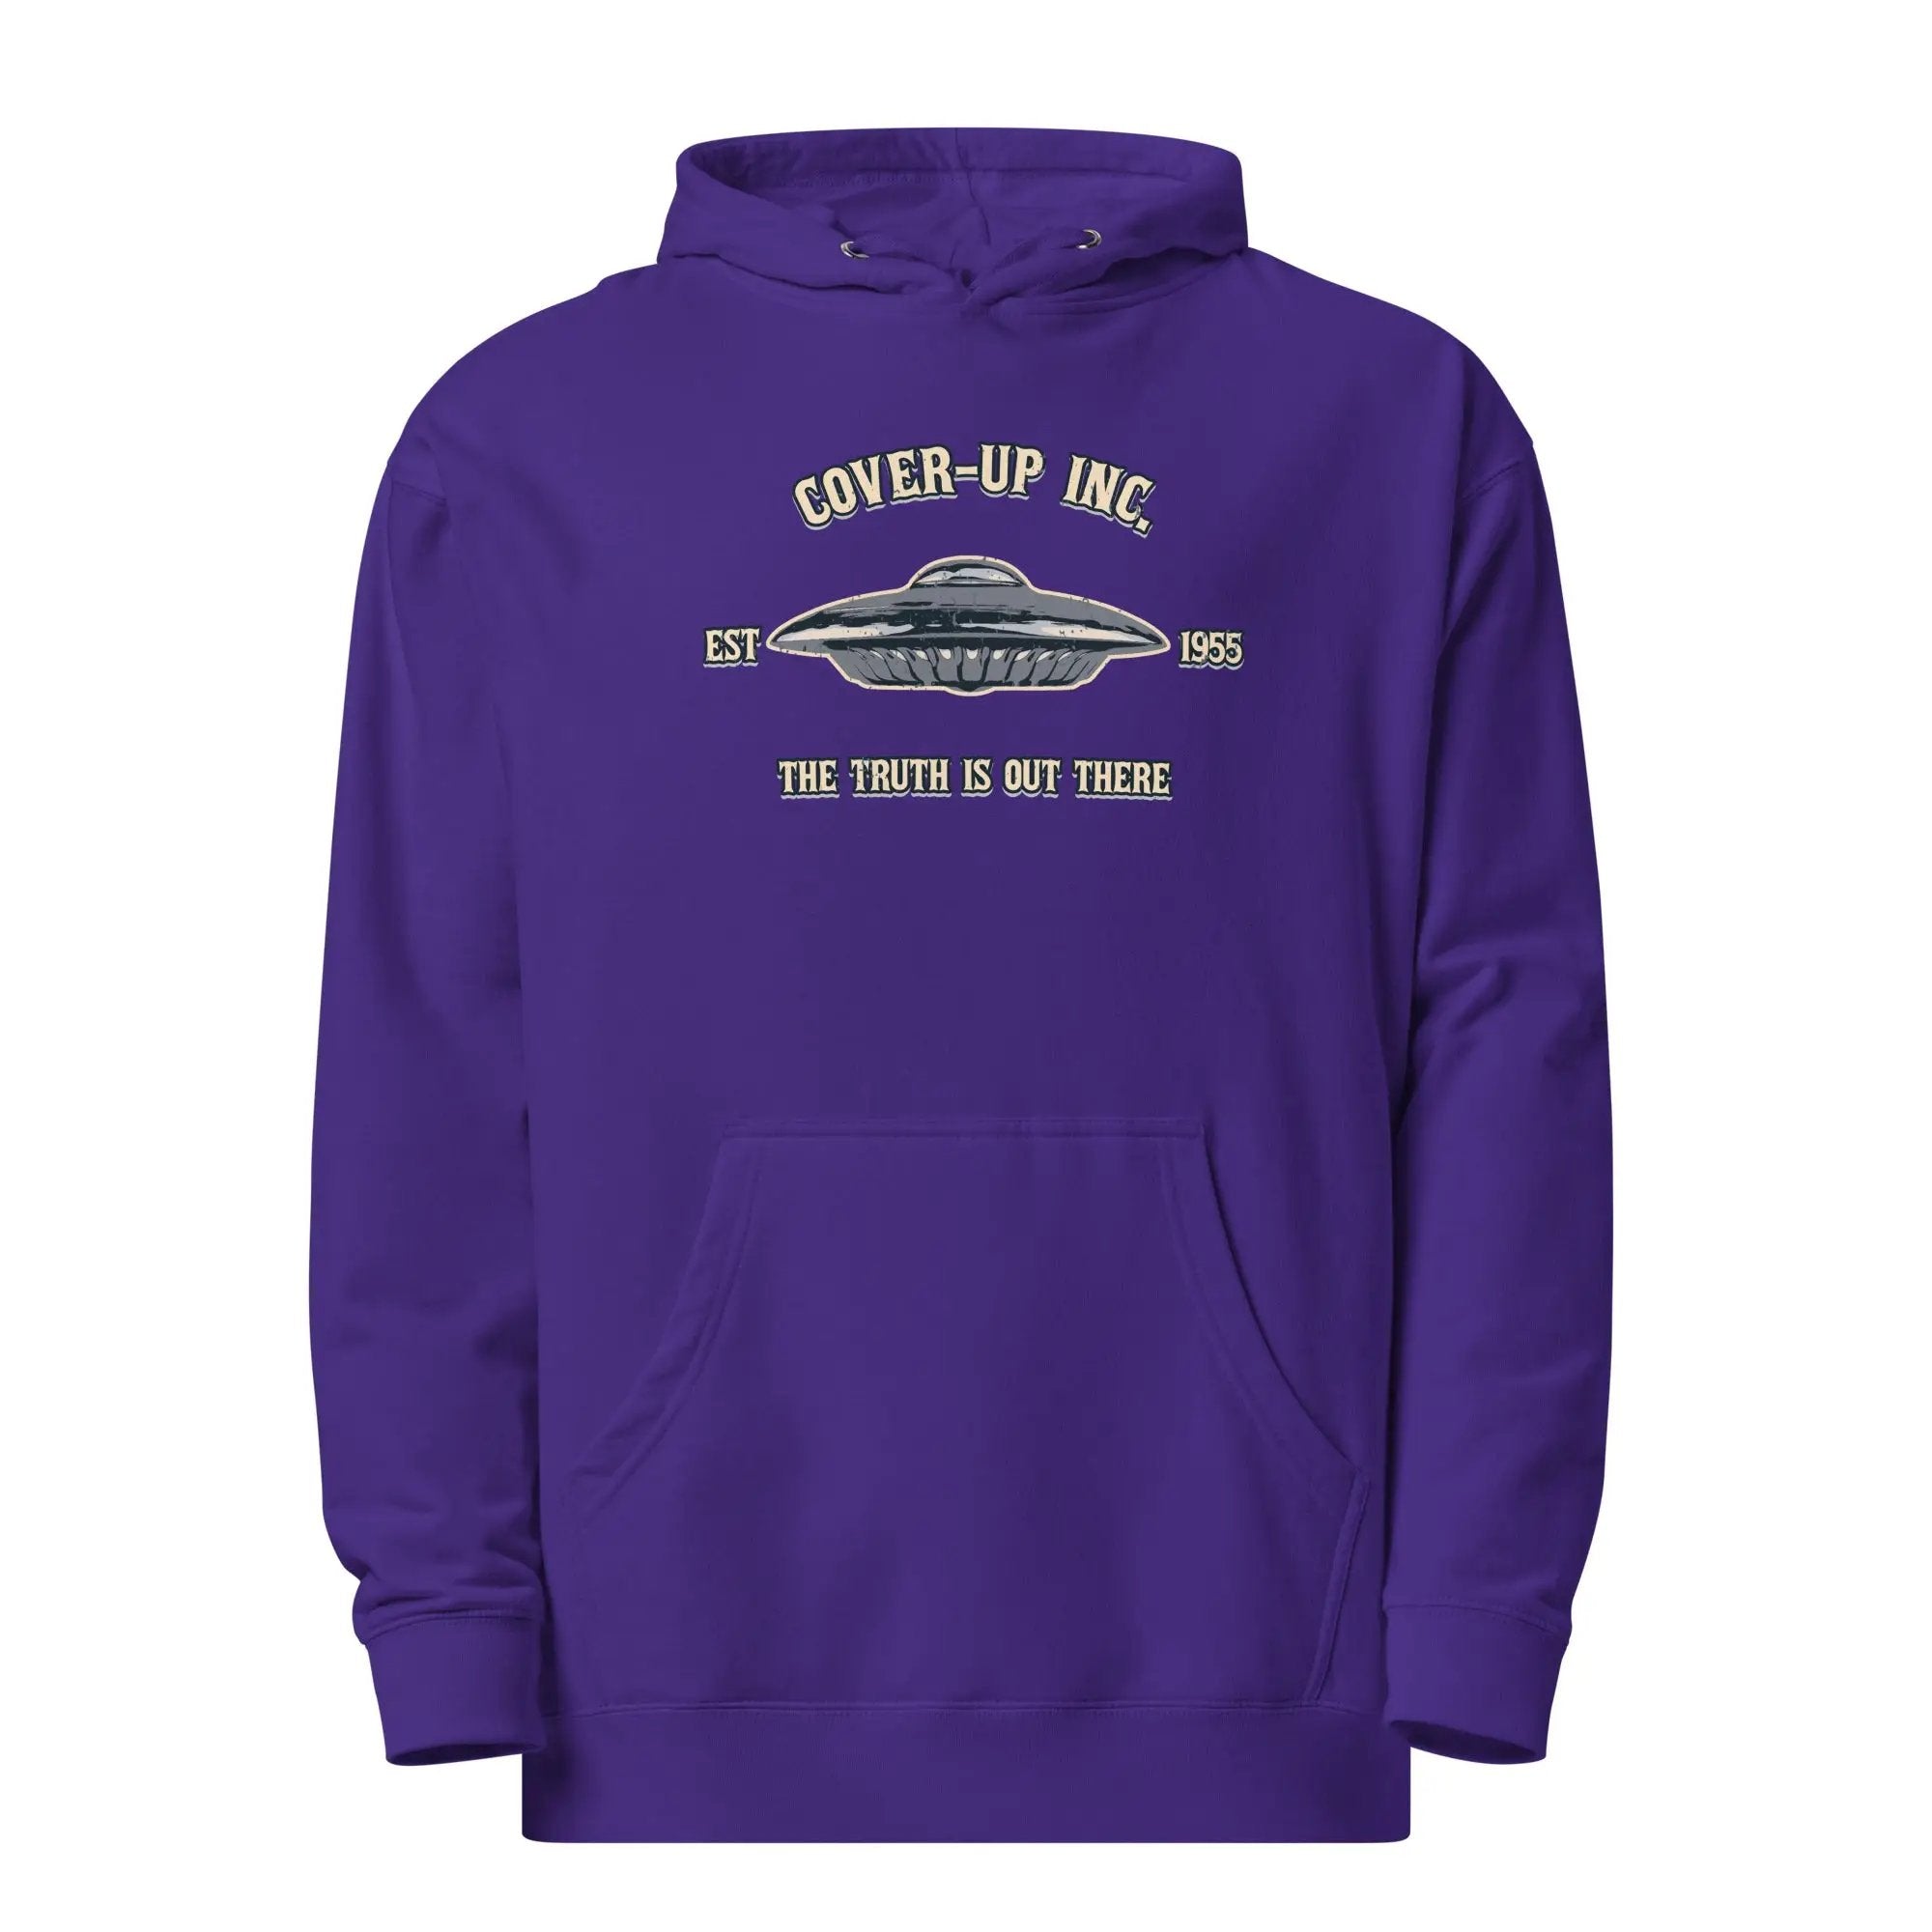 Cover-Up Inc. Unisex midweight hoodie